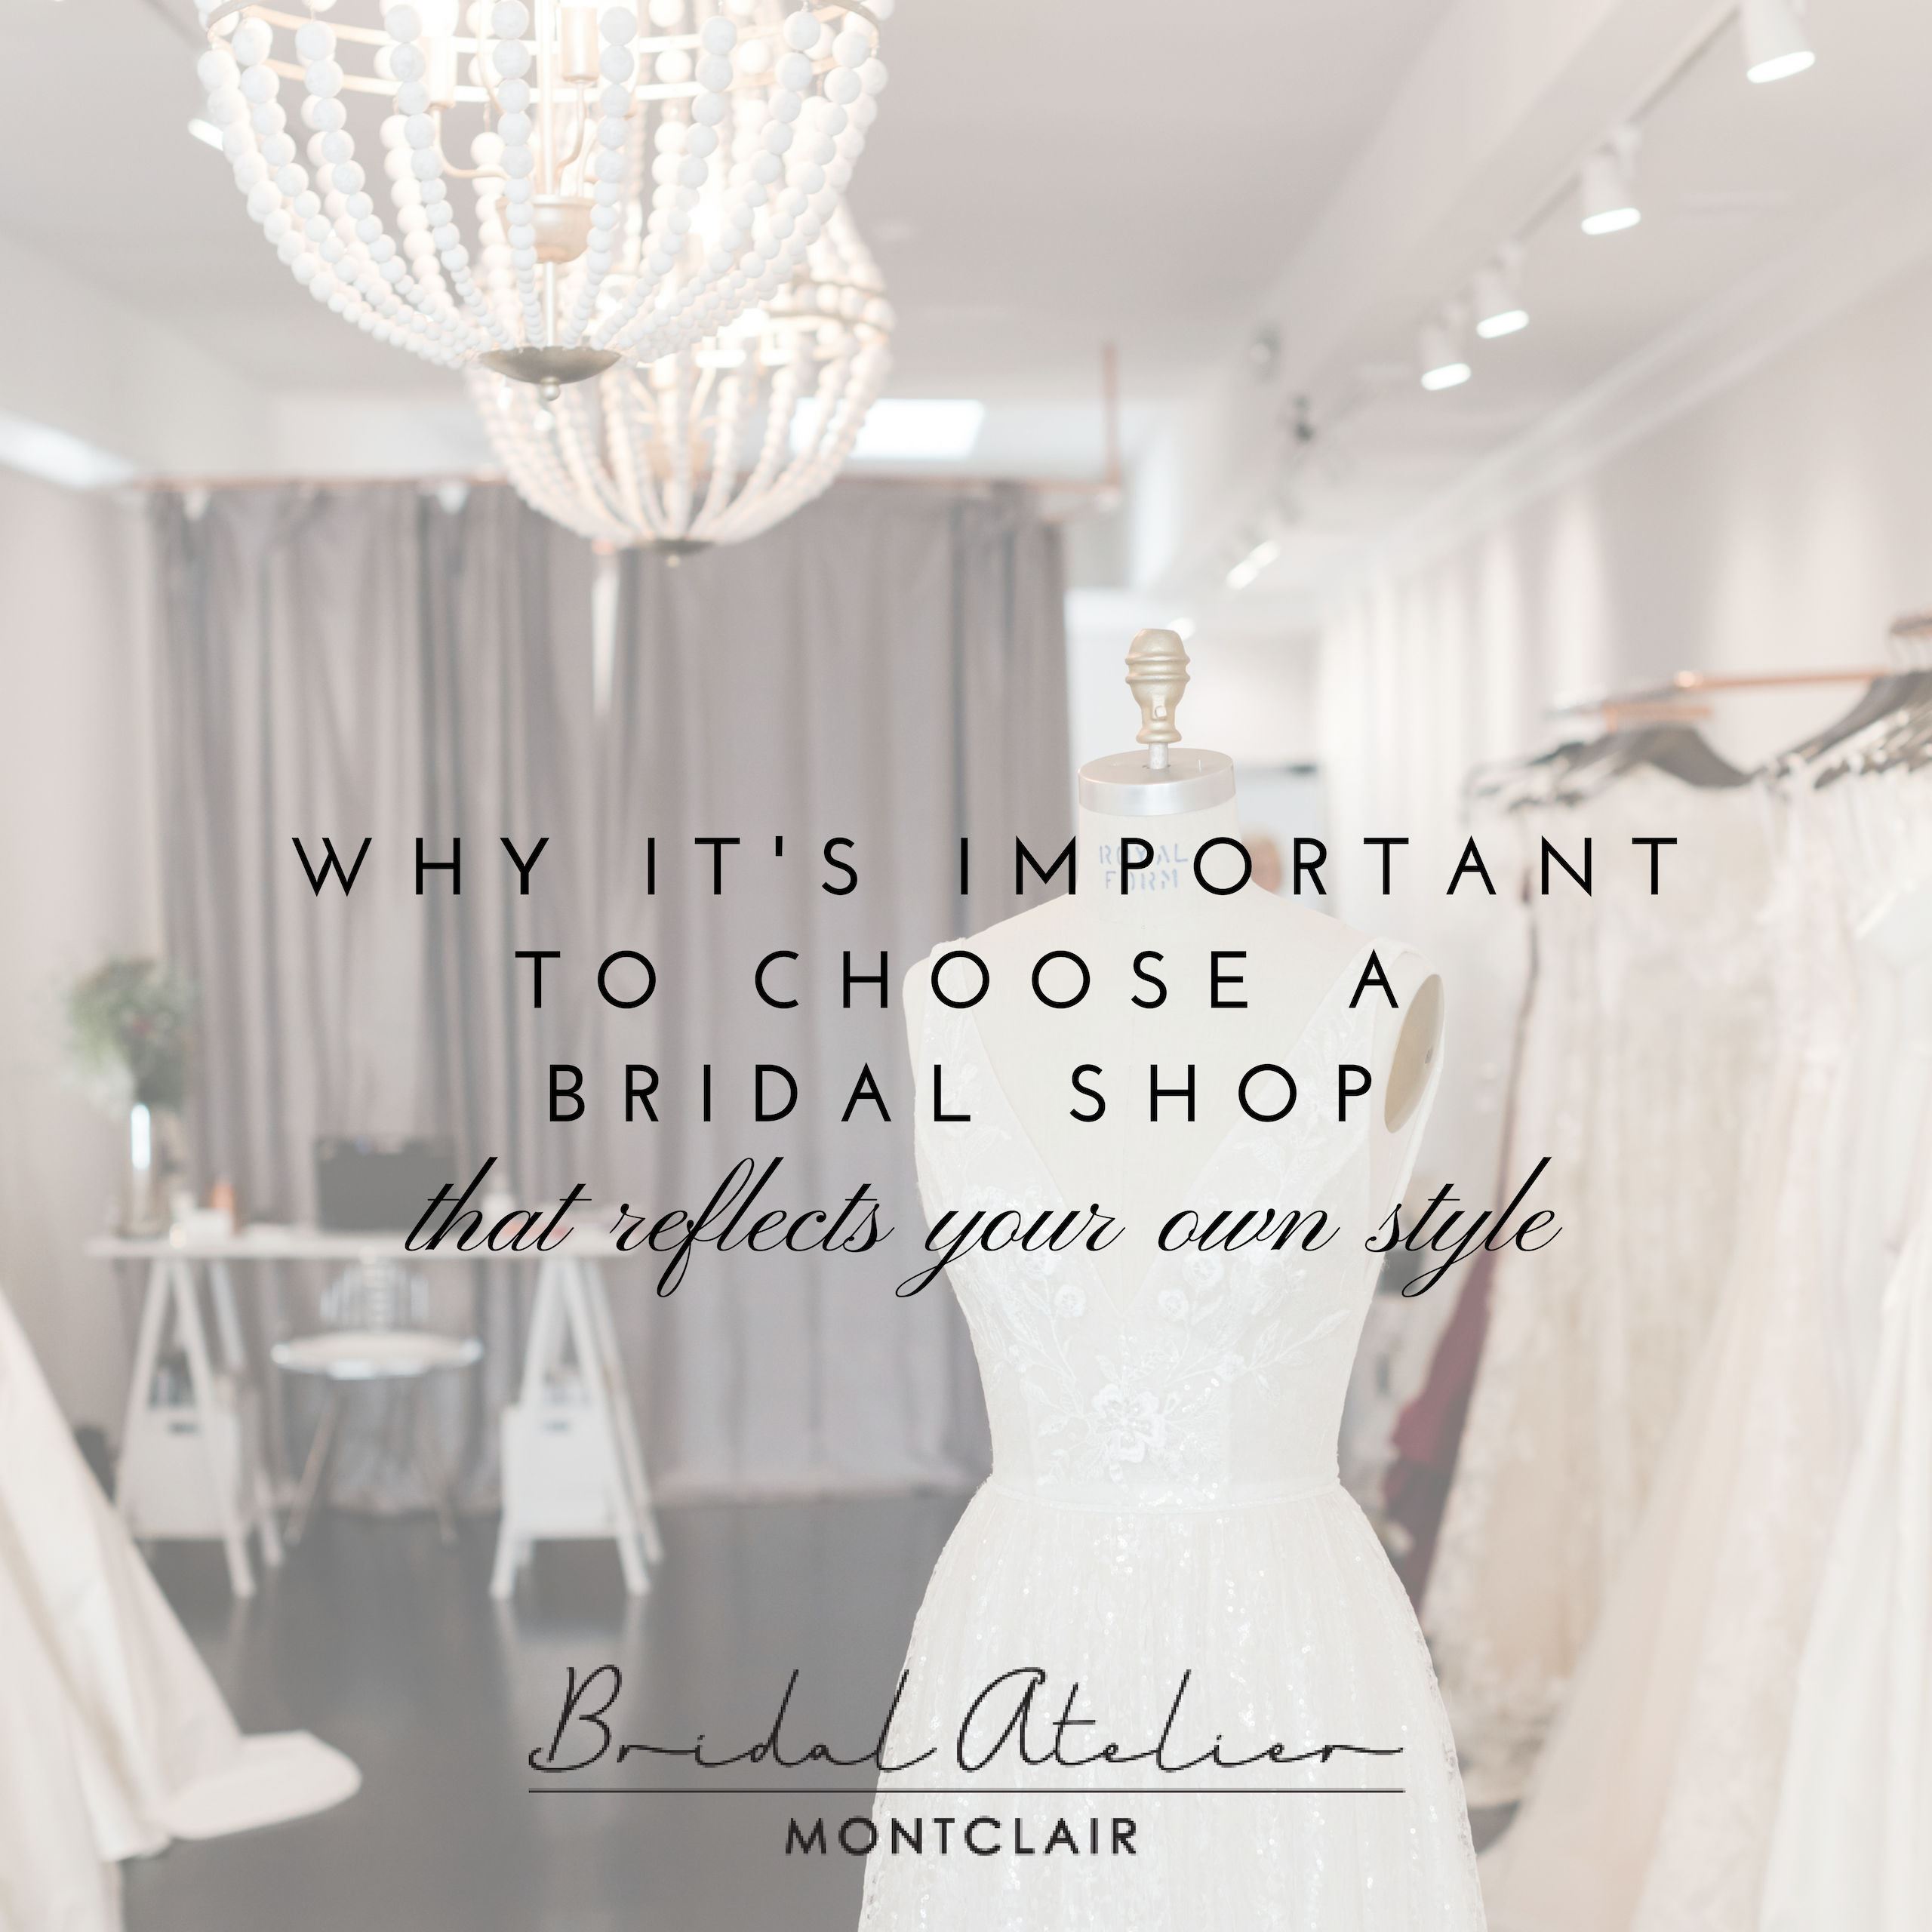 WHY IT’S IMPORTANT TO CHOOSE A BRIDAL SHOP THAT REFLECTS YOUR OWN STYLE Image